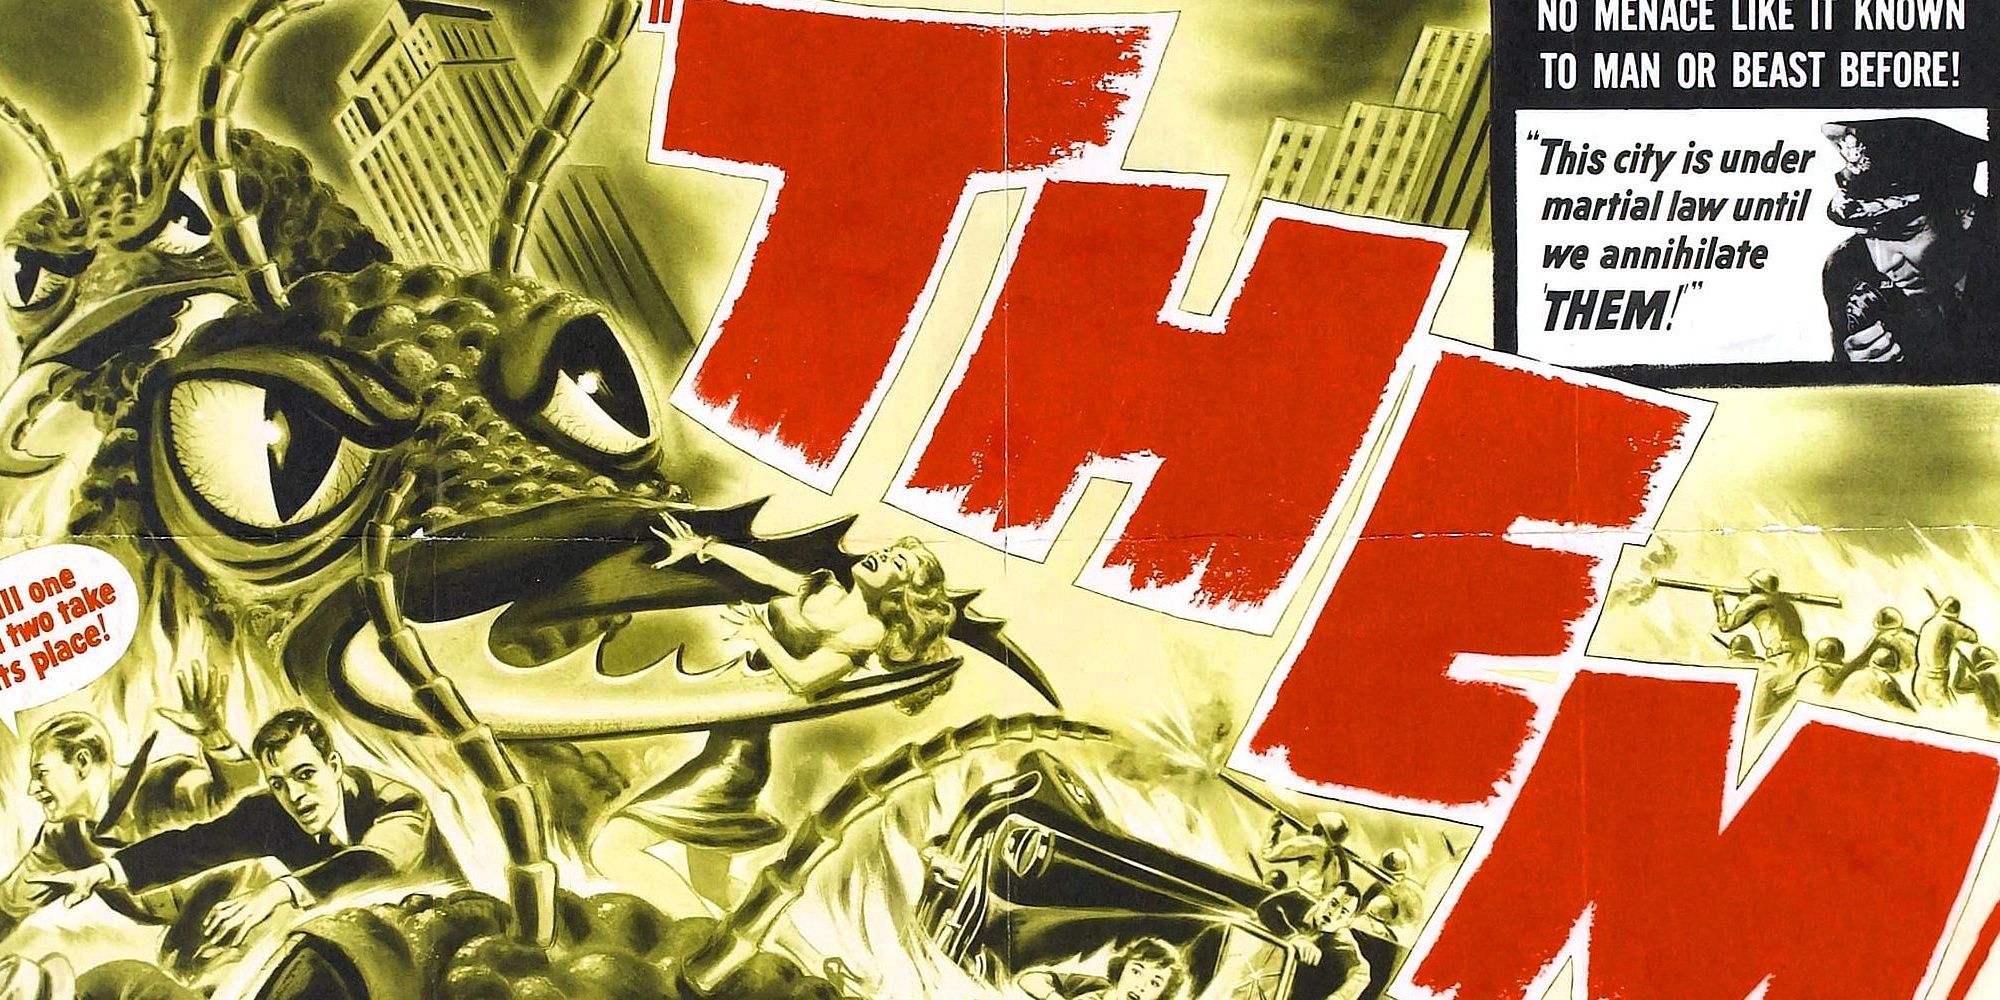 them-1954-poster Cropped